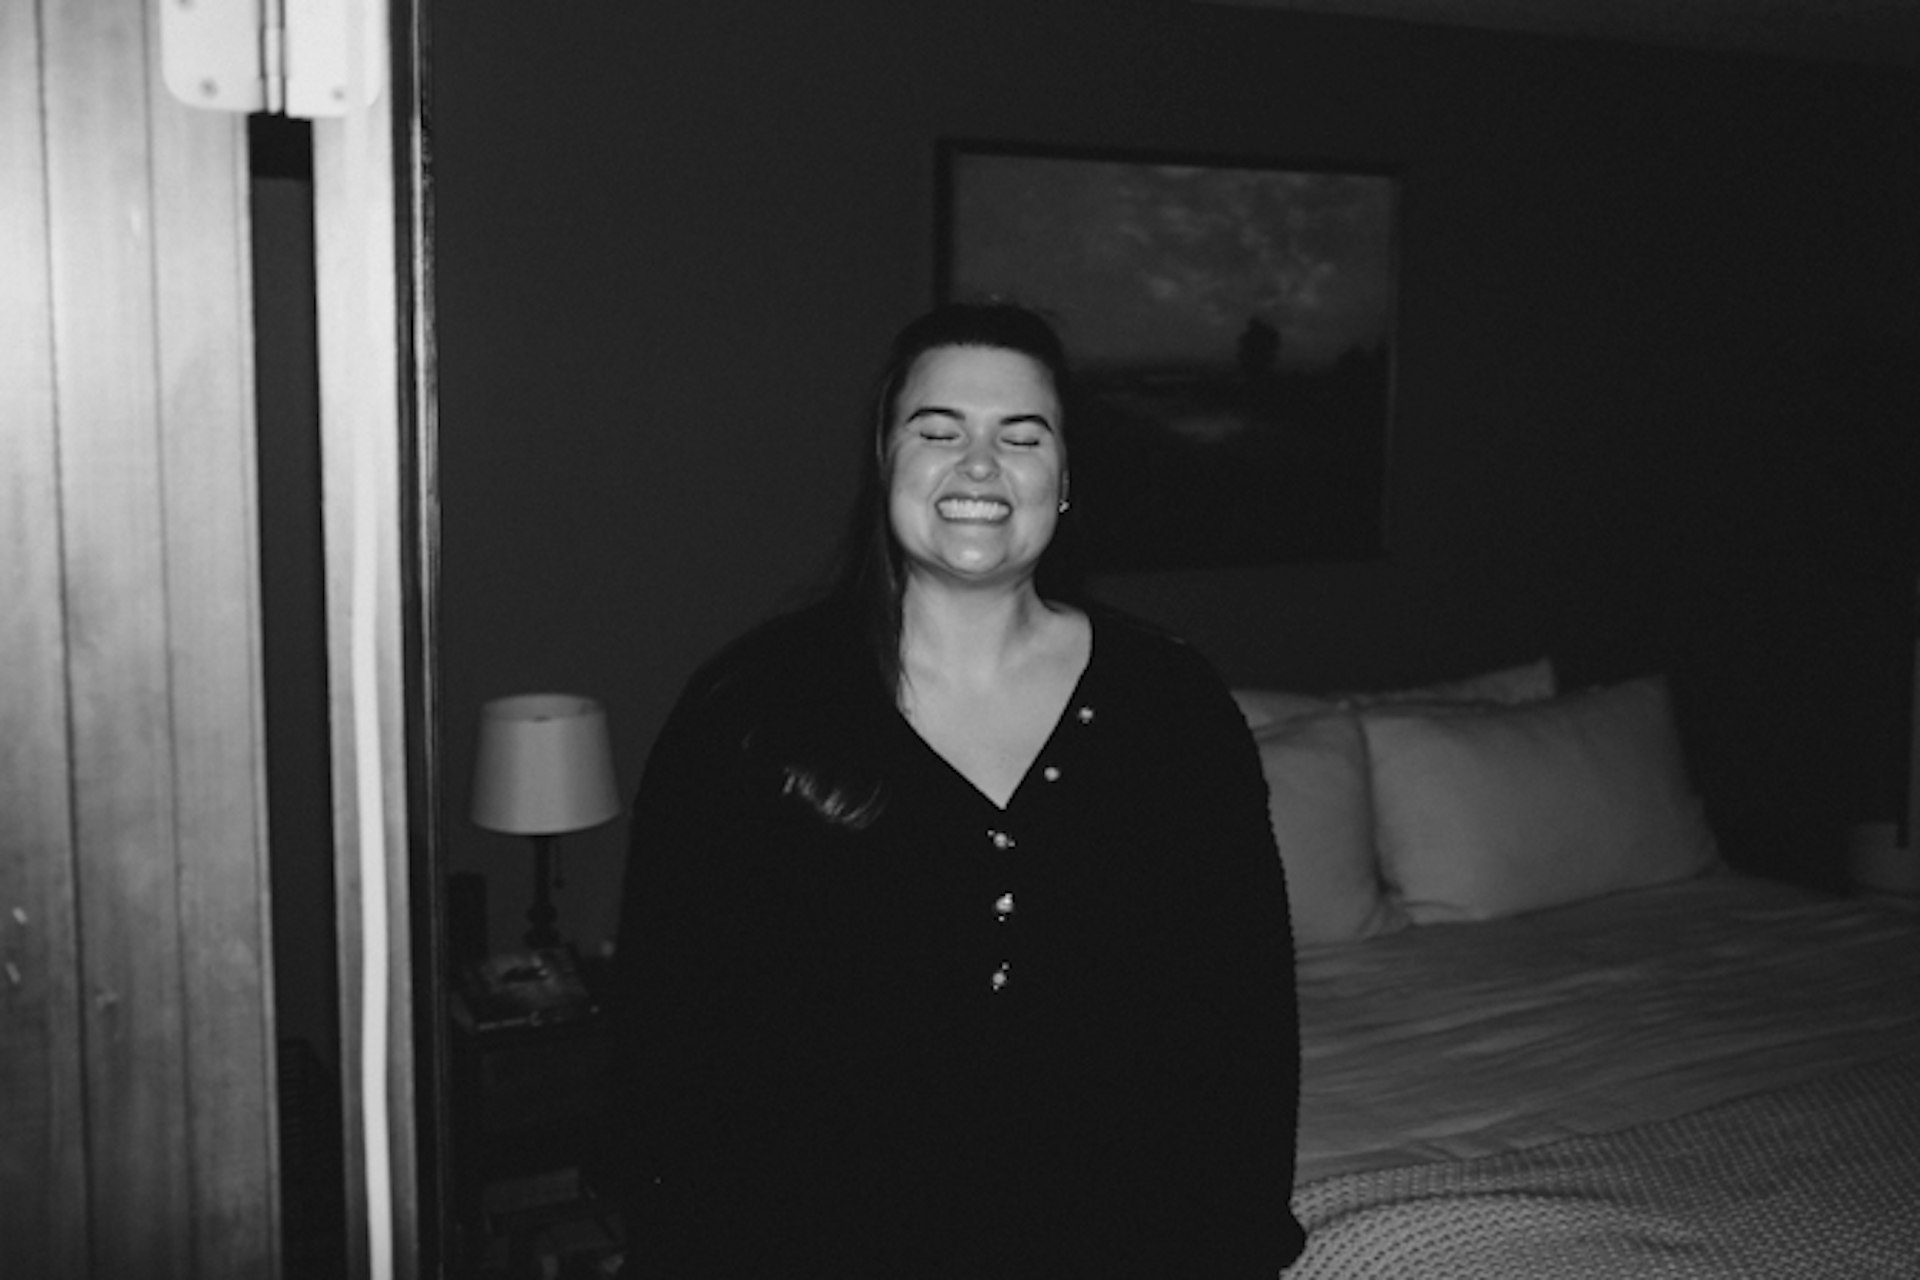 Syd smiling in our room